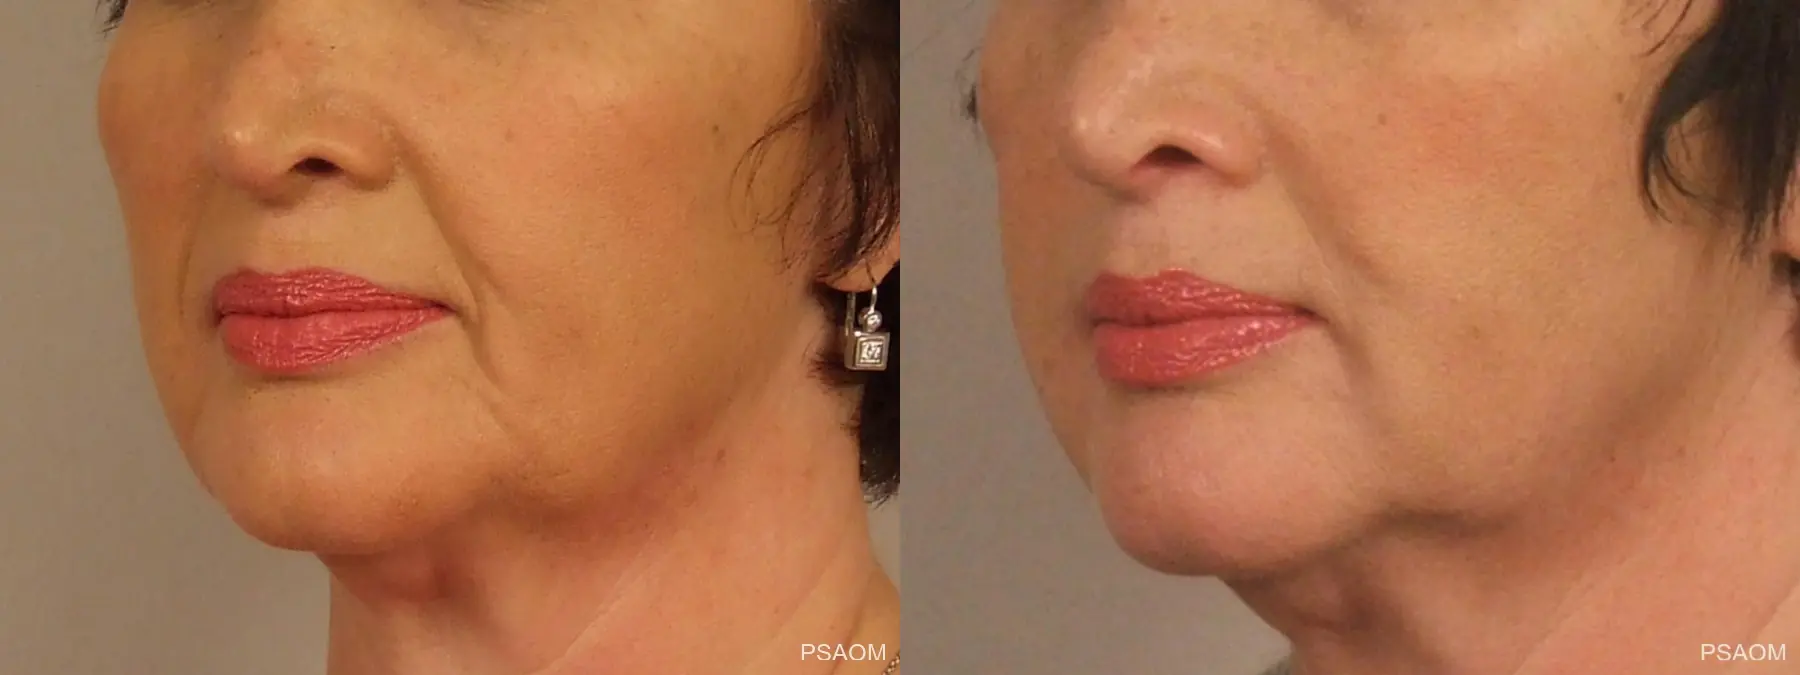 Injectables - Face: Patient 1 - Before and After 3